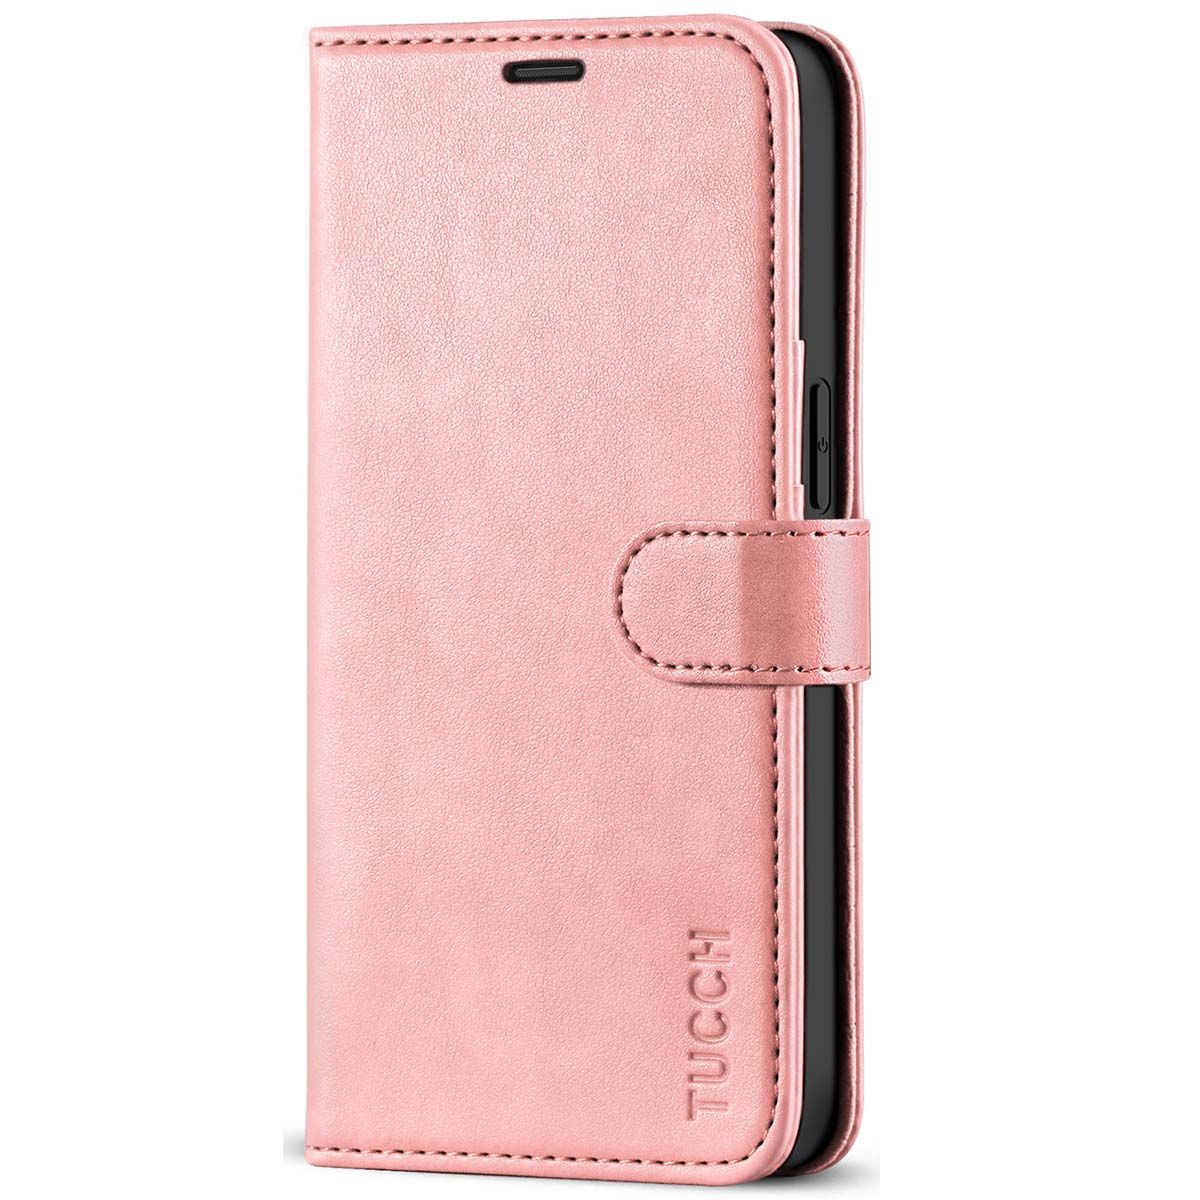 Tucch Iphone 12 Mini Wallet Case Rose Gold Iphone 12 Mini Leather Cover Pu Leather Rfid Blocking Flip Folio Kickstand Magnetic Clasp